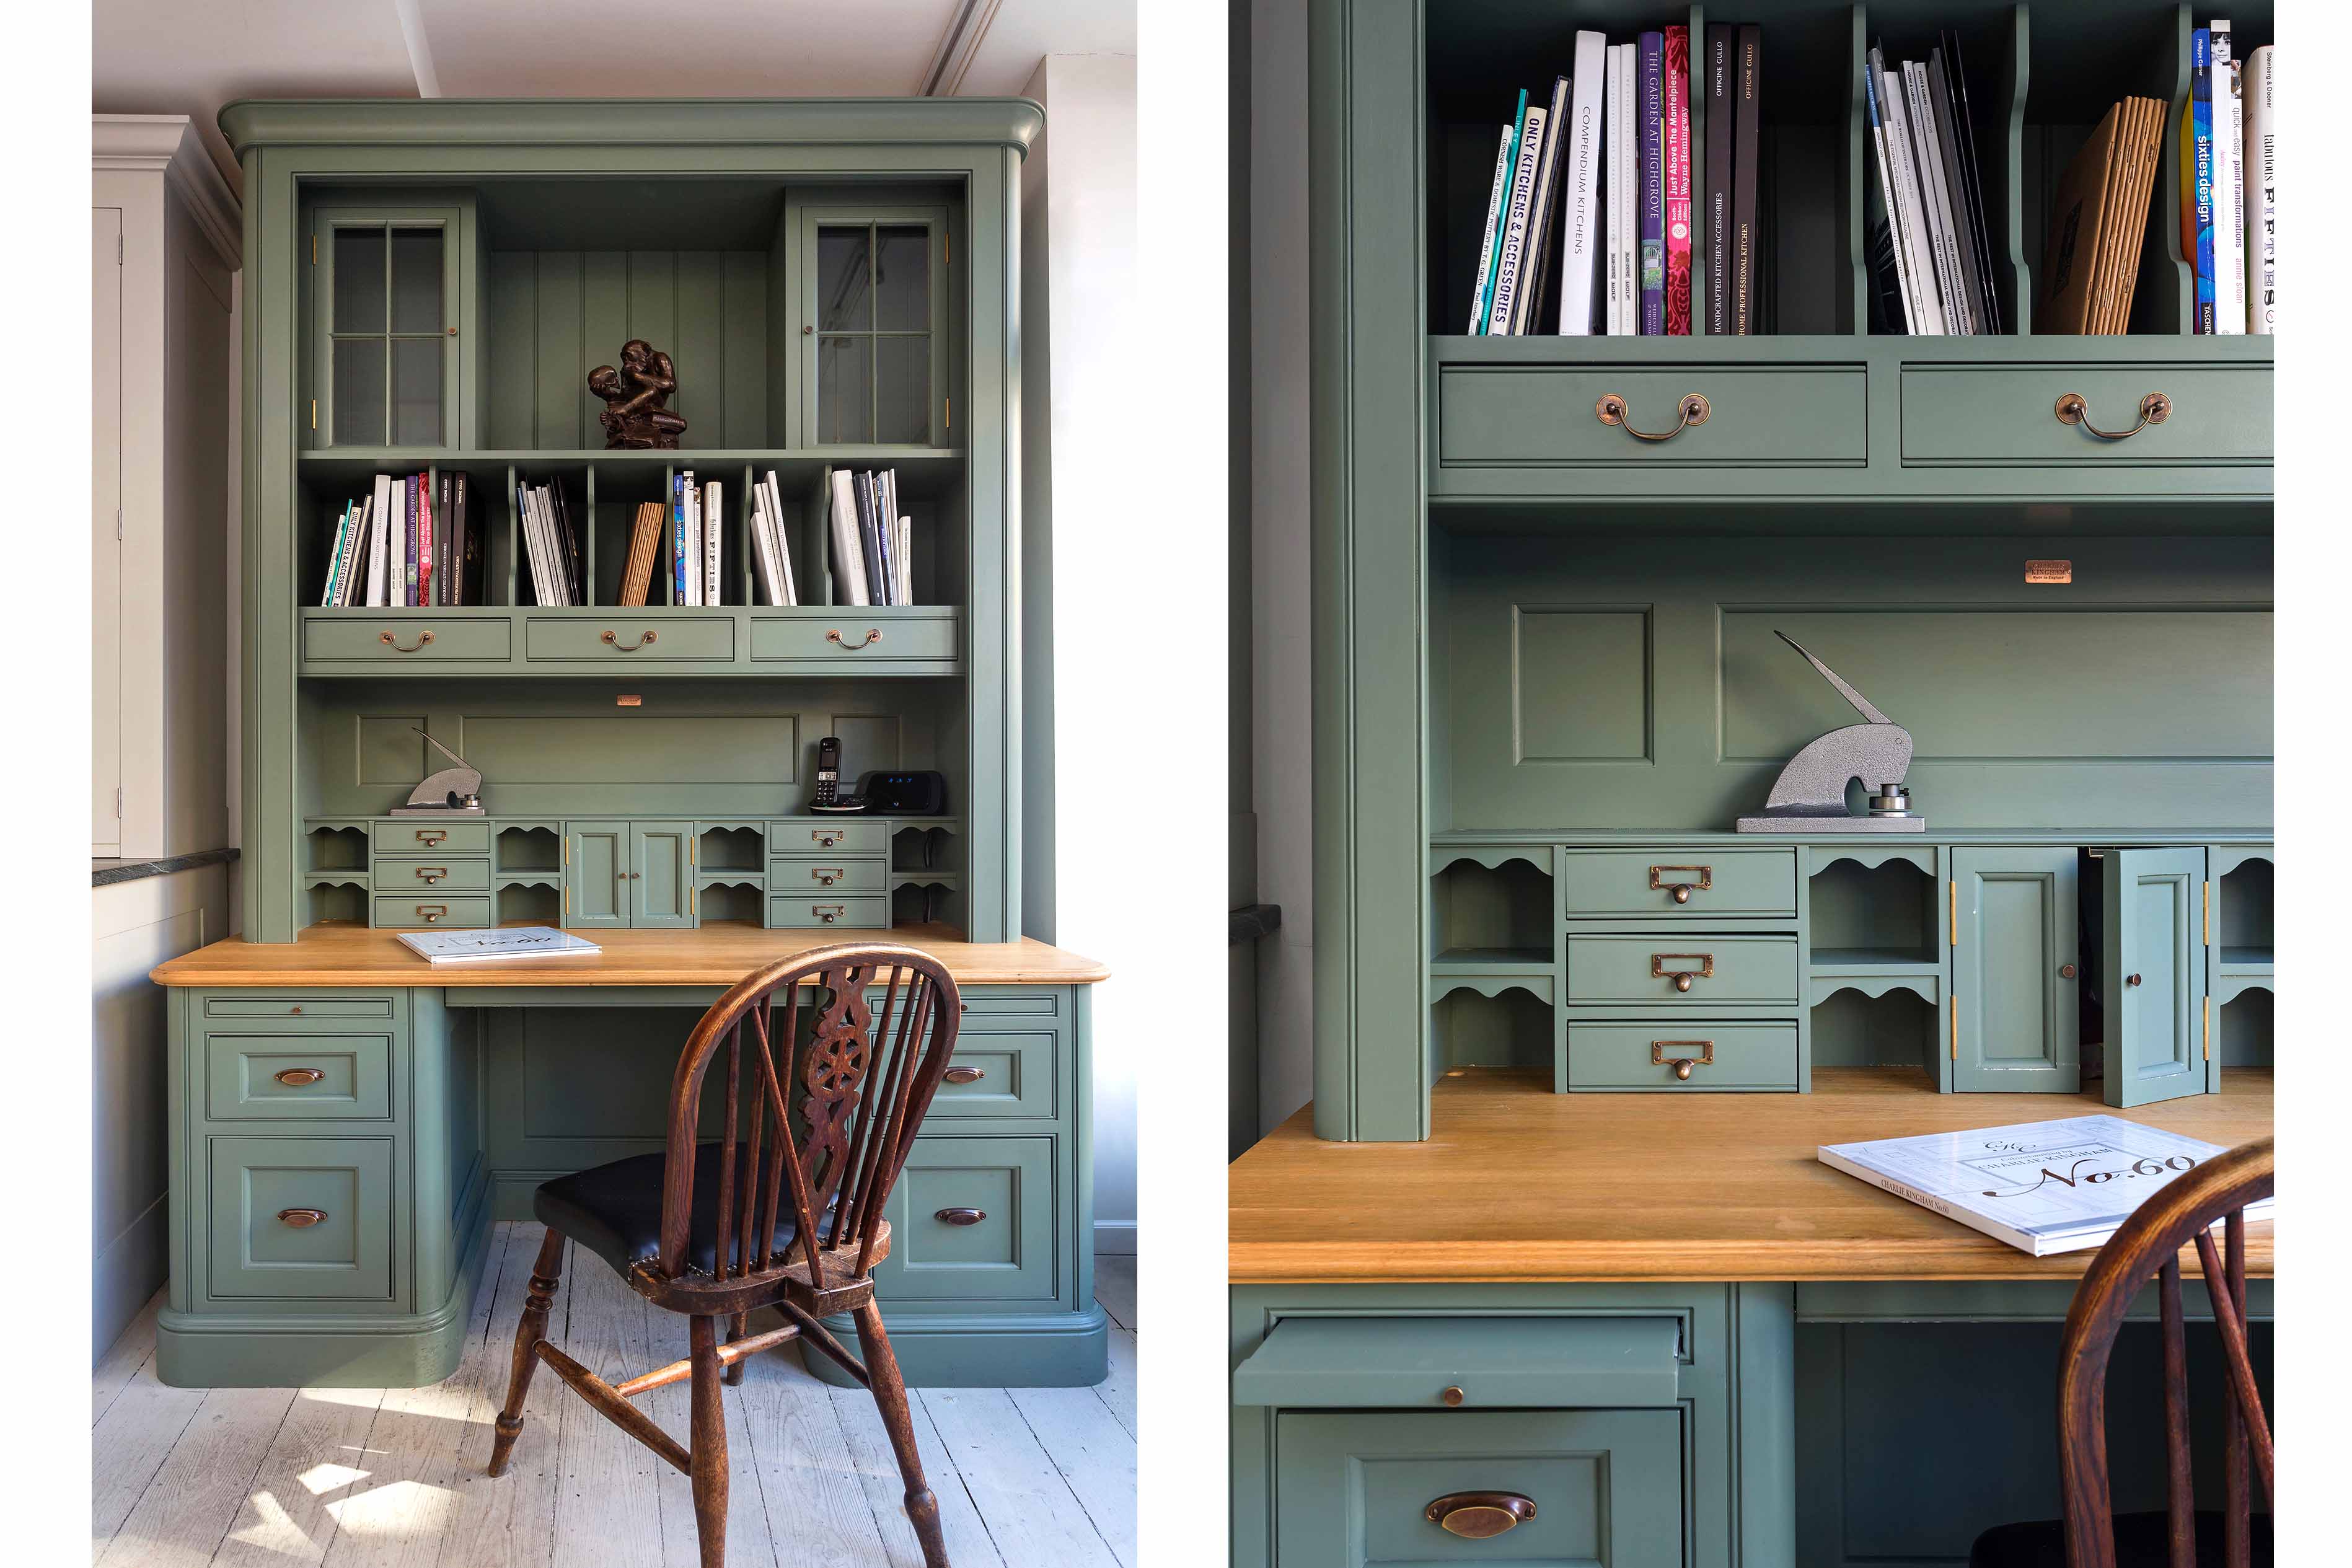 003. Bespoke library study book case desk Perrin and Rowe Armac Martin Farrow and Ball near Petersfield, Hampshire